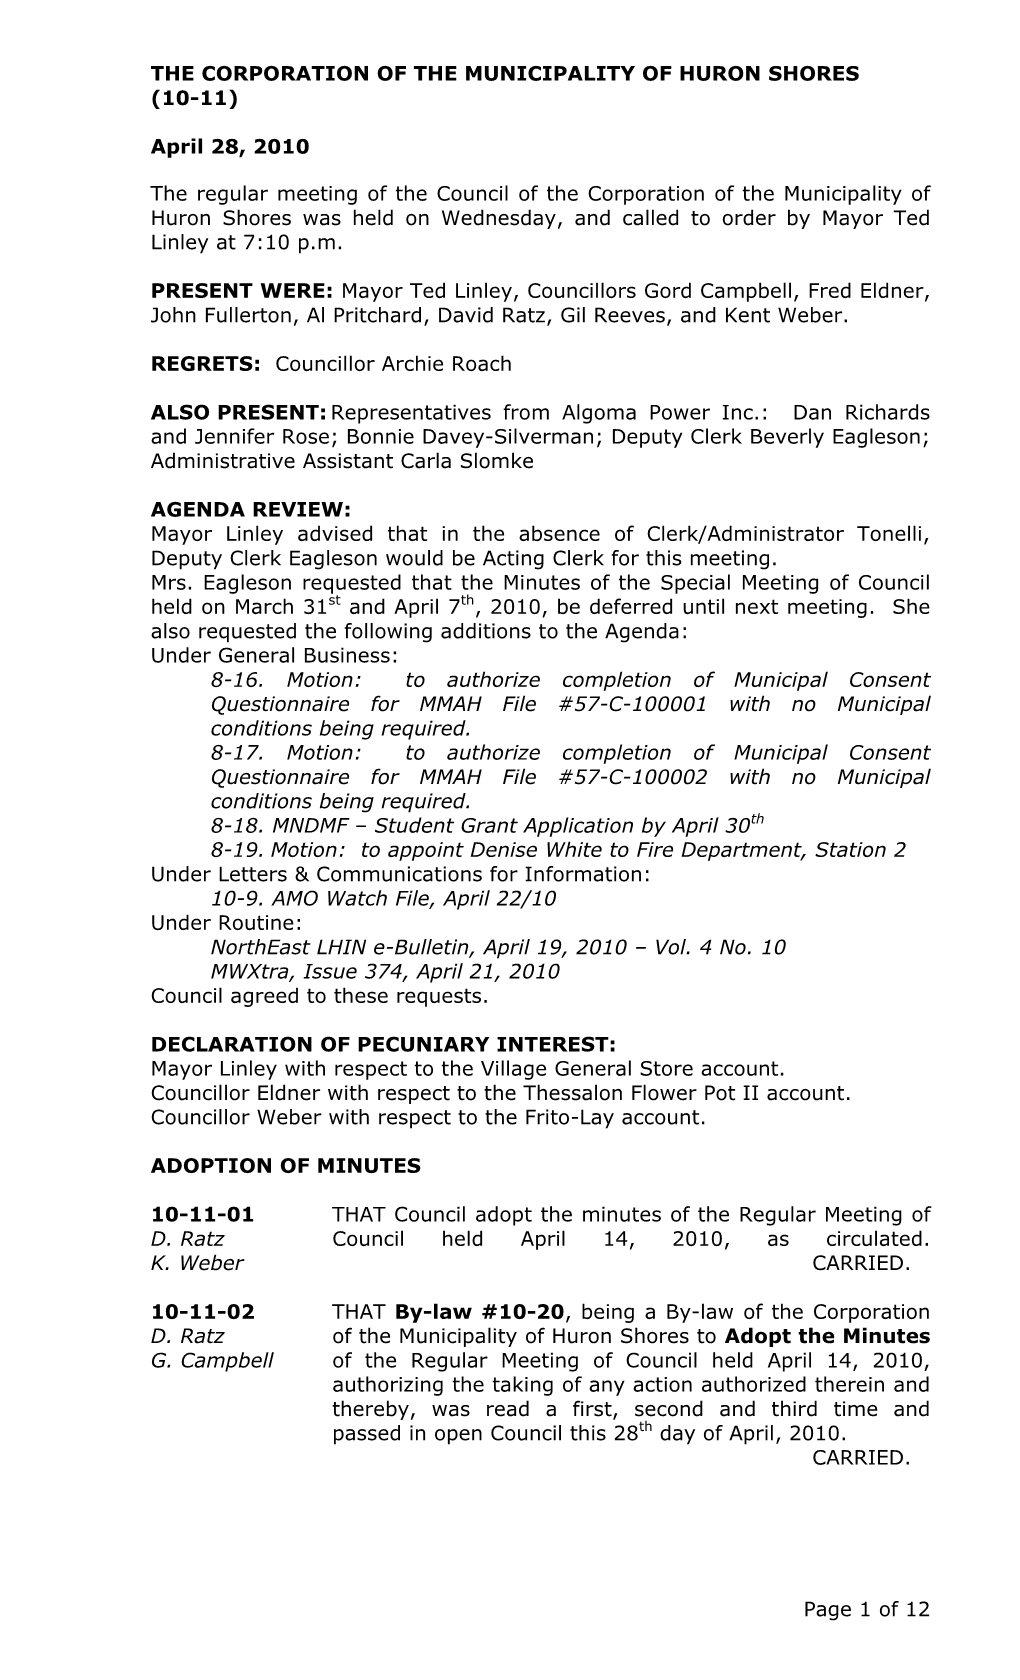 April 28, 2010 Page 1 of 12 the Regular Meeting of the Council of Th